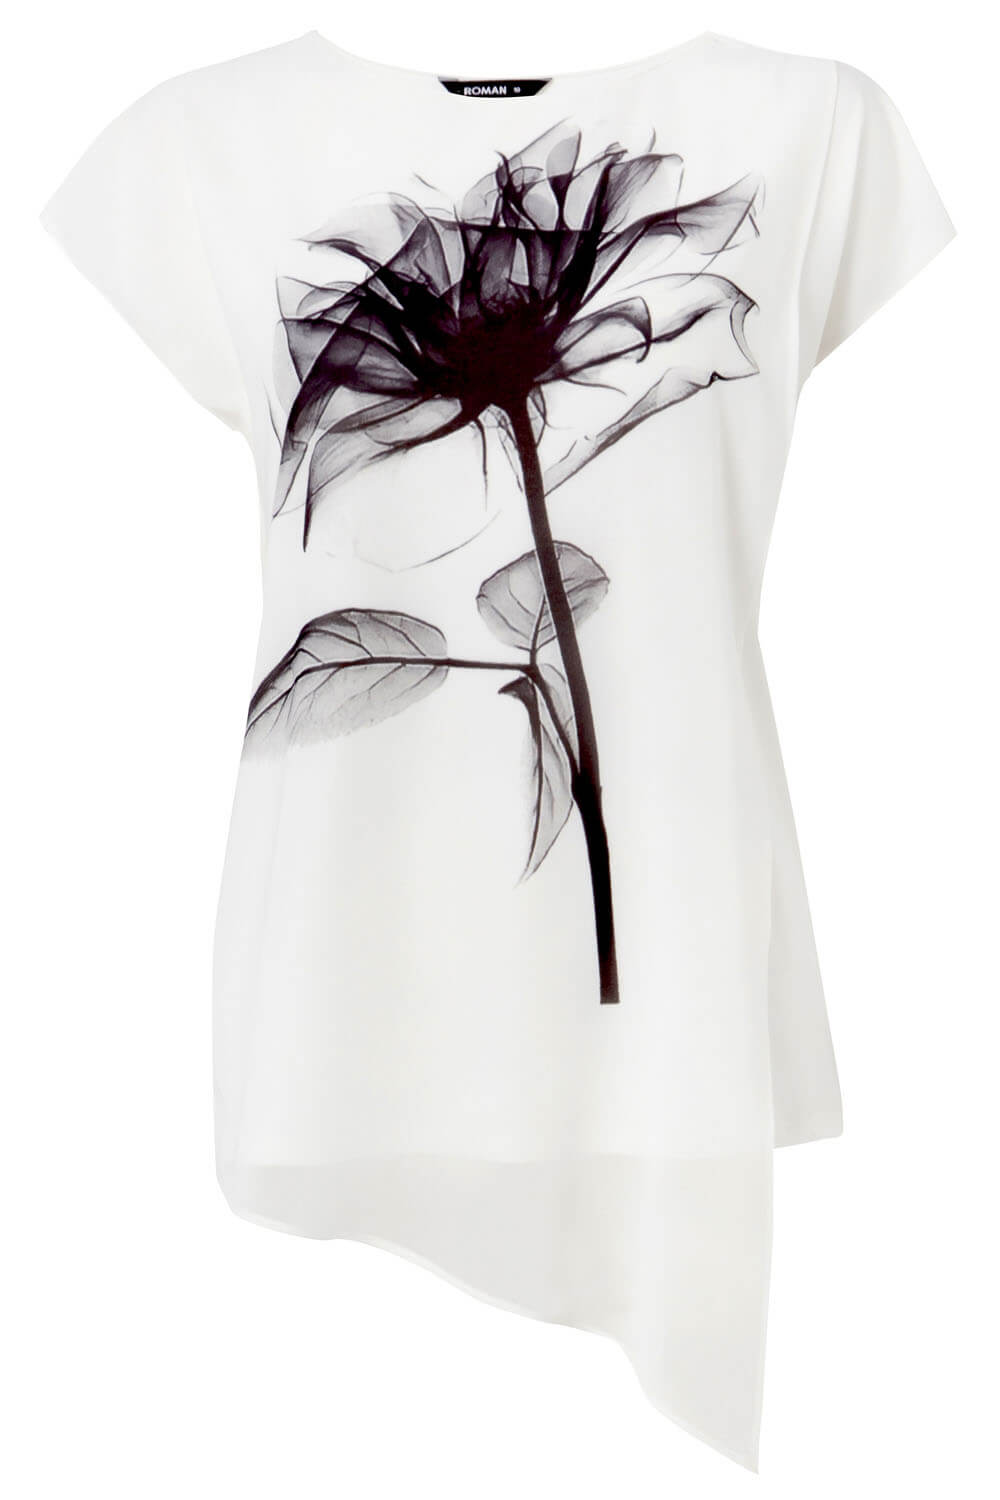 Black Floral Placement Print Overlay Top, Image 4 of 4